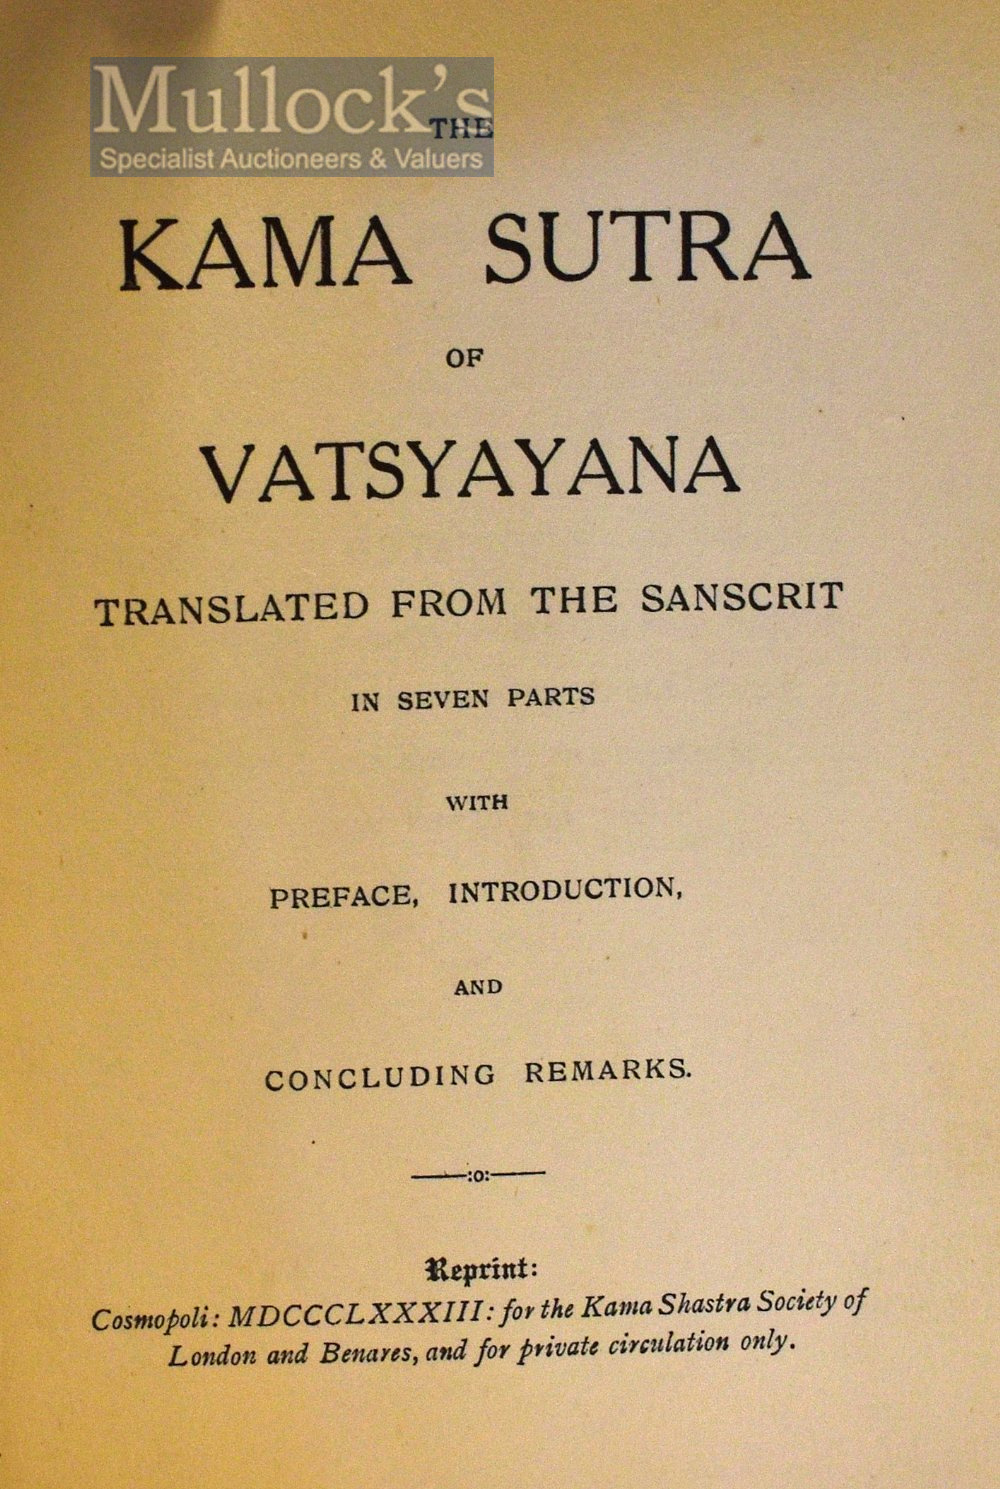 The Kama Sutra Of Vatsyayana 1883 Book – Translated from the Sanscrit in seven parts with Preface, - Image 2 of 2